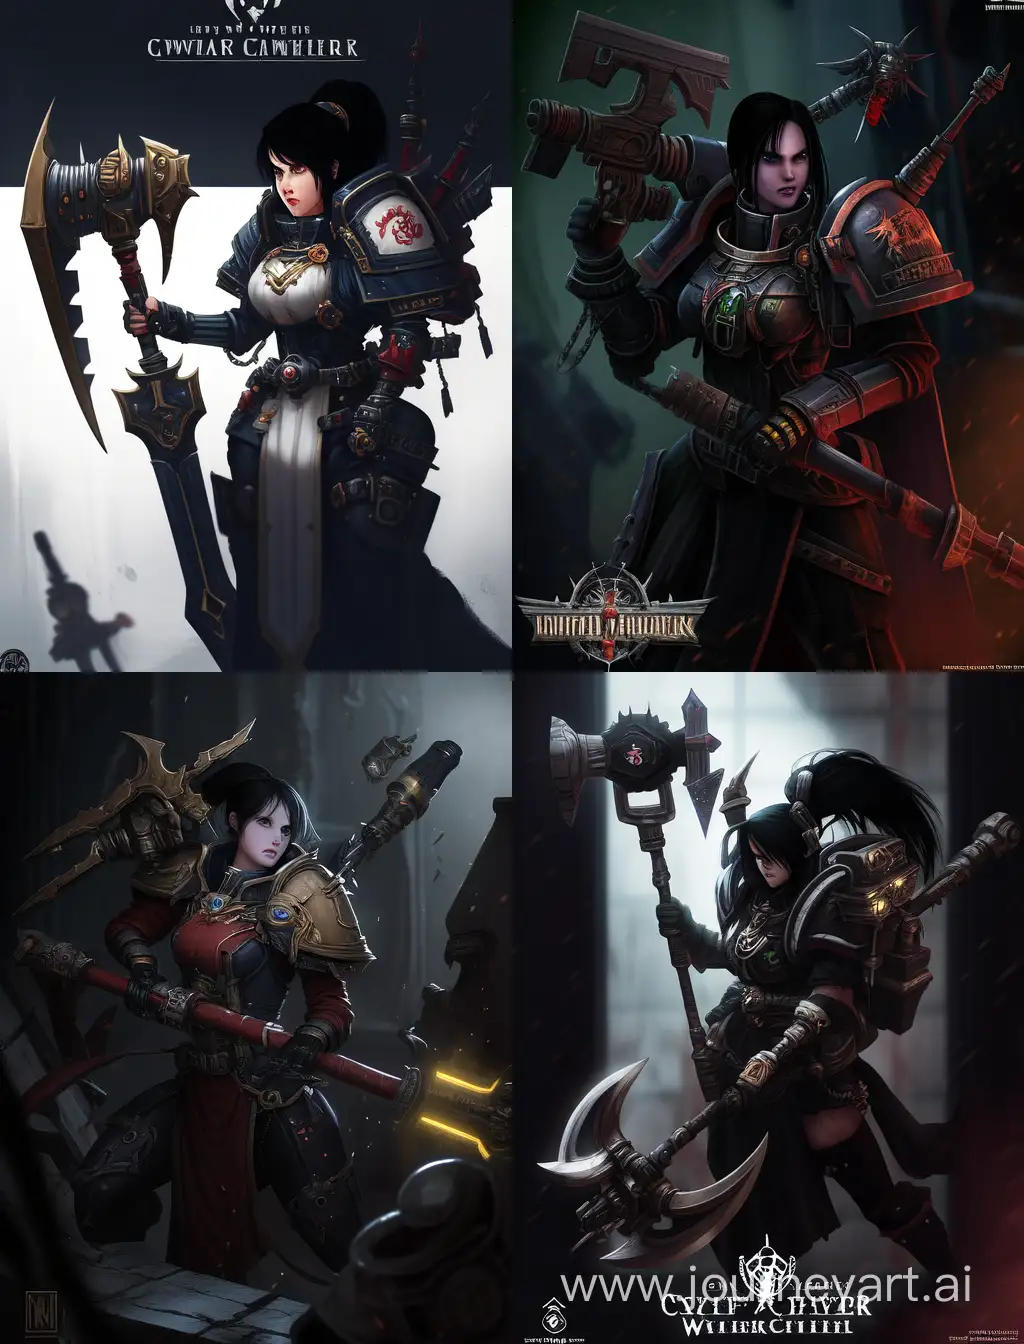 warhammer 40k dark eldar girl with black hair, with carpenter's hammer in hands, with square logo on weapon